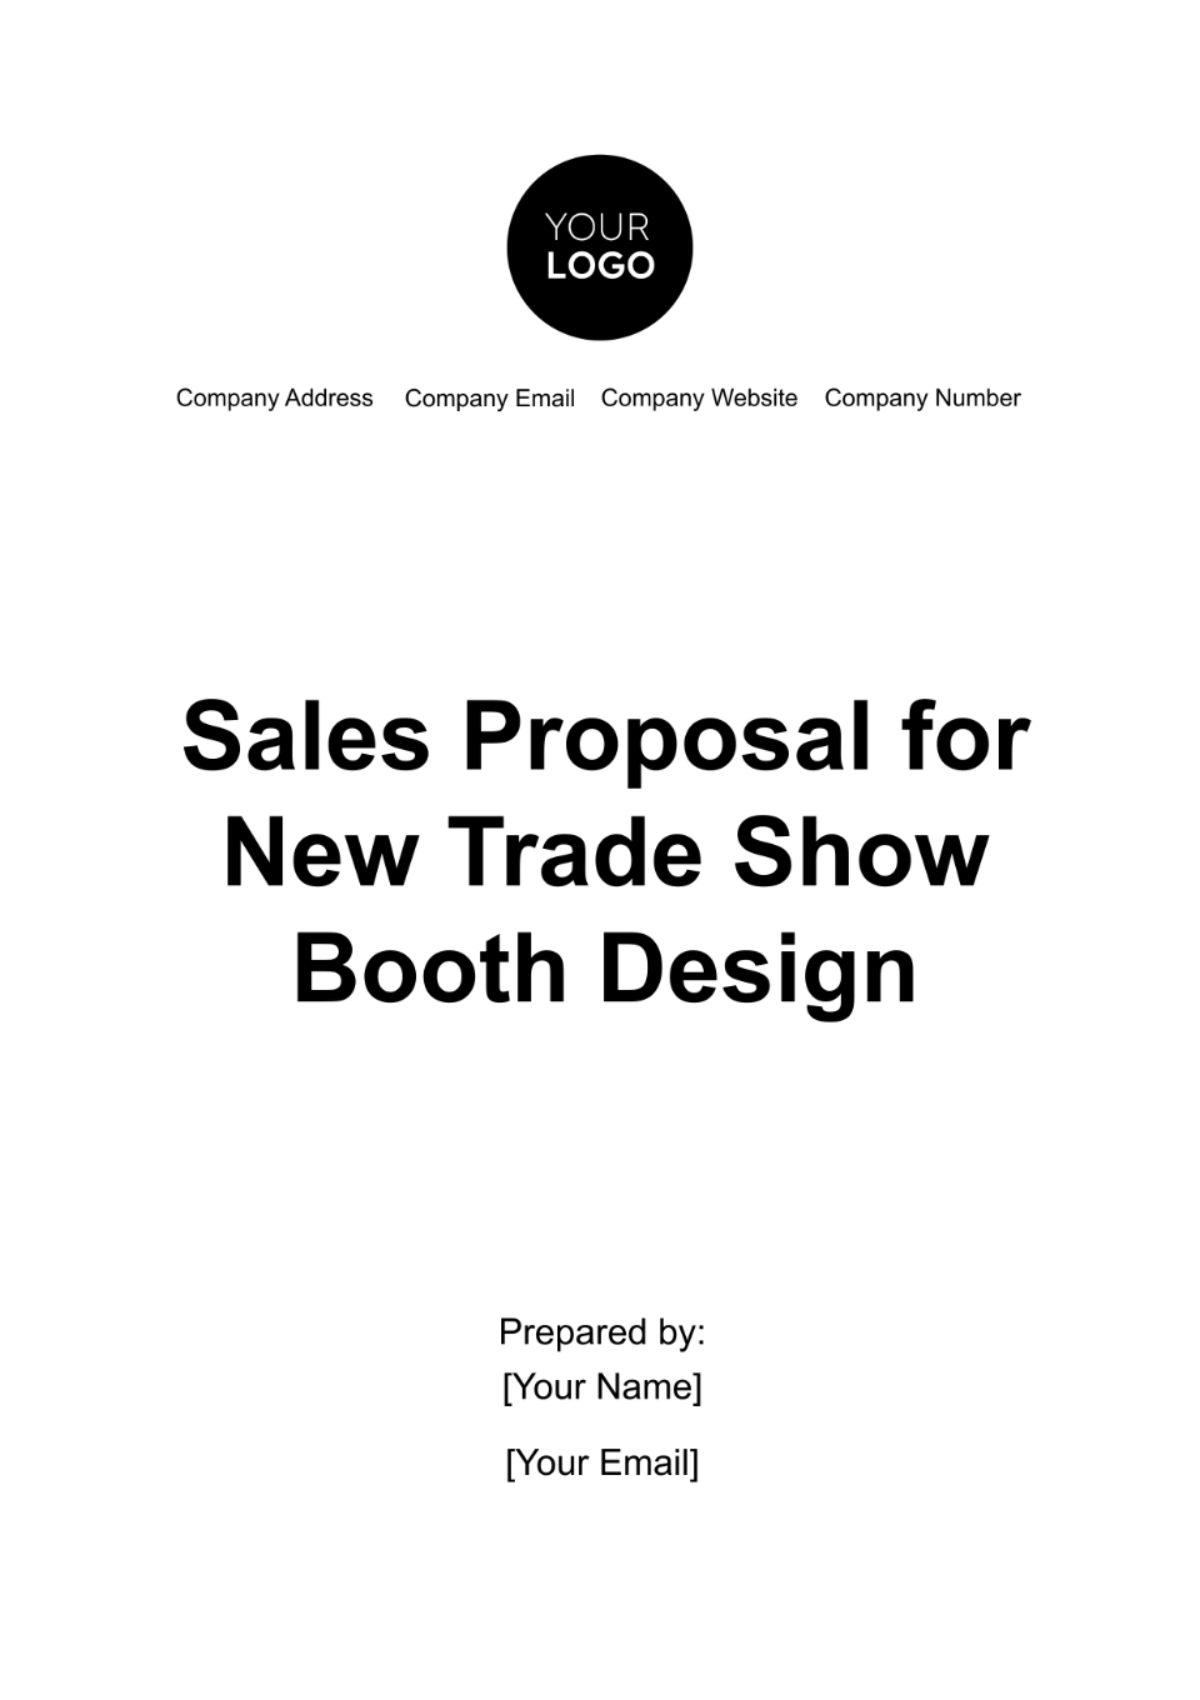 Sales Proposal for New Trade Show Booth Design Template